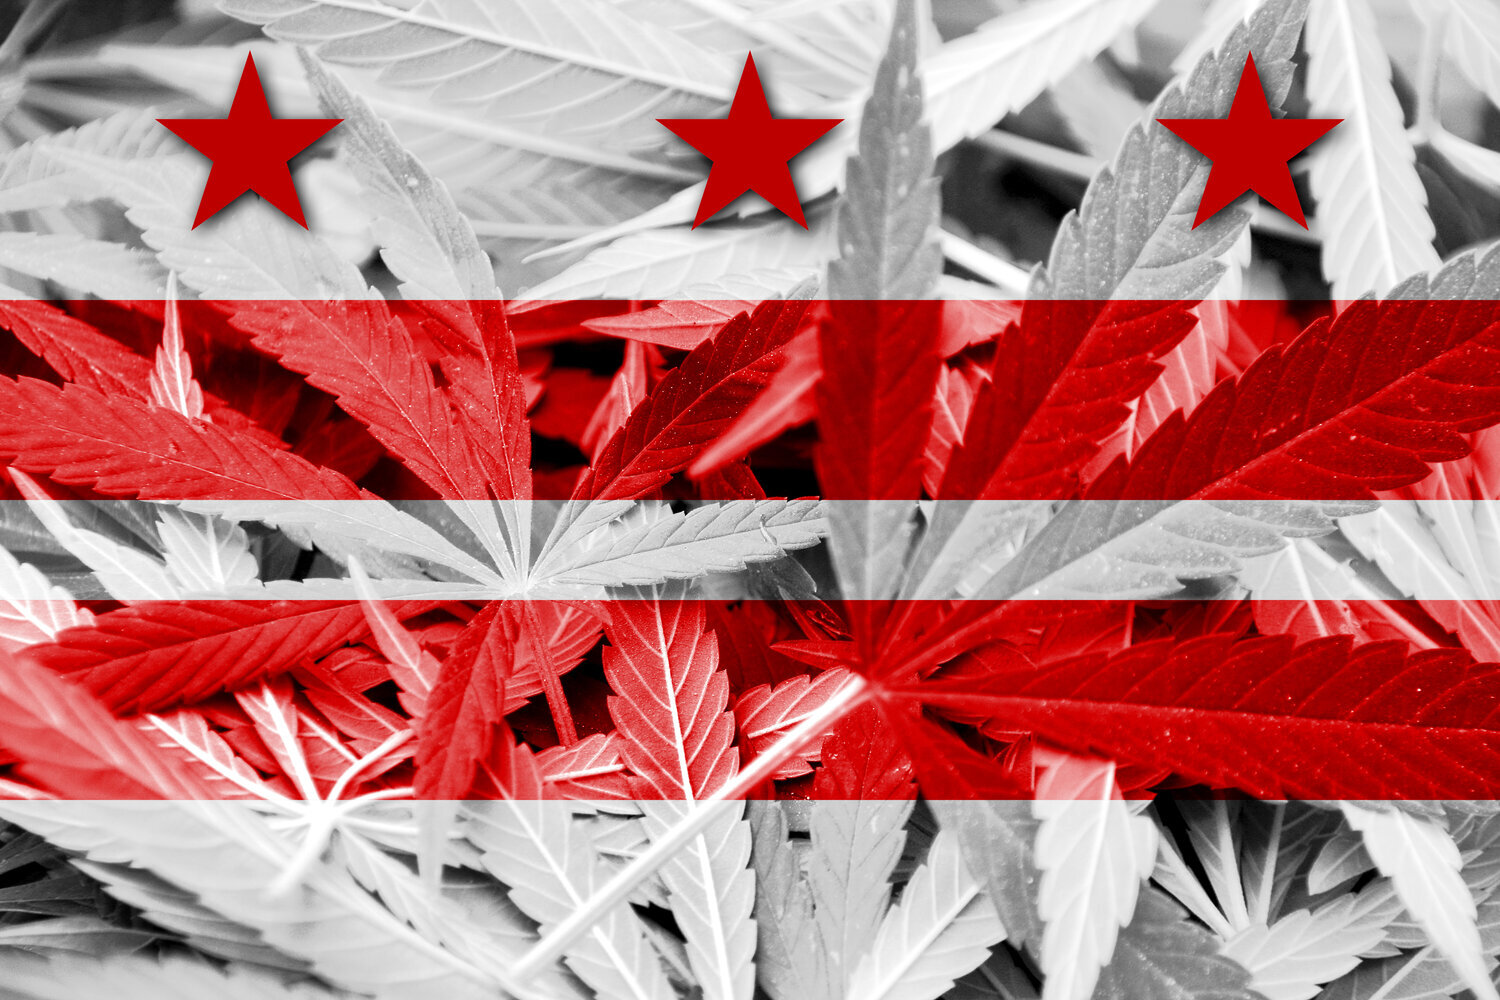 Washington D.C. Medicinal Cannabis Dispensaries Can Now Deliver During COVID-19